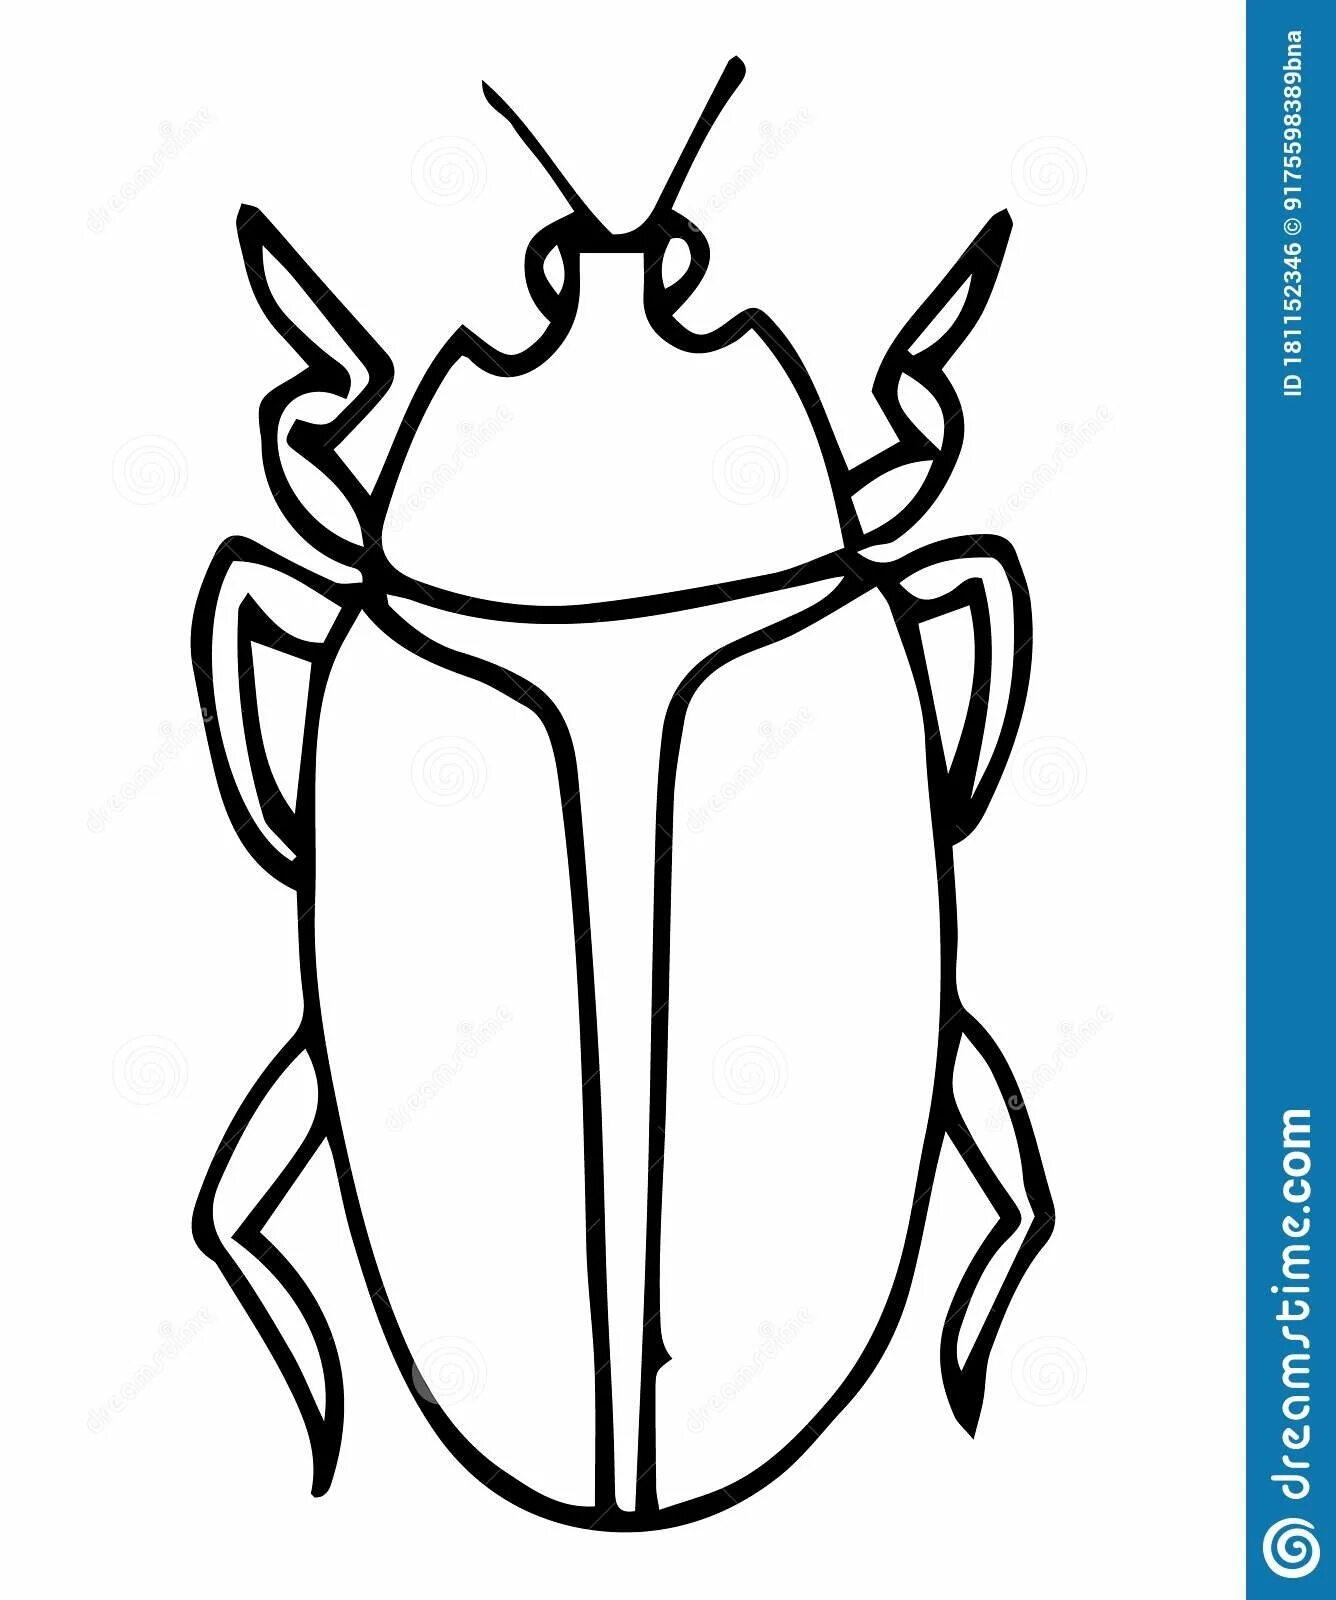 Distinctive beetle coloring pages for 3-4 year olds